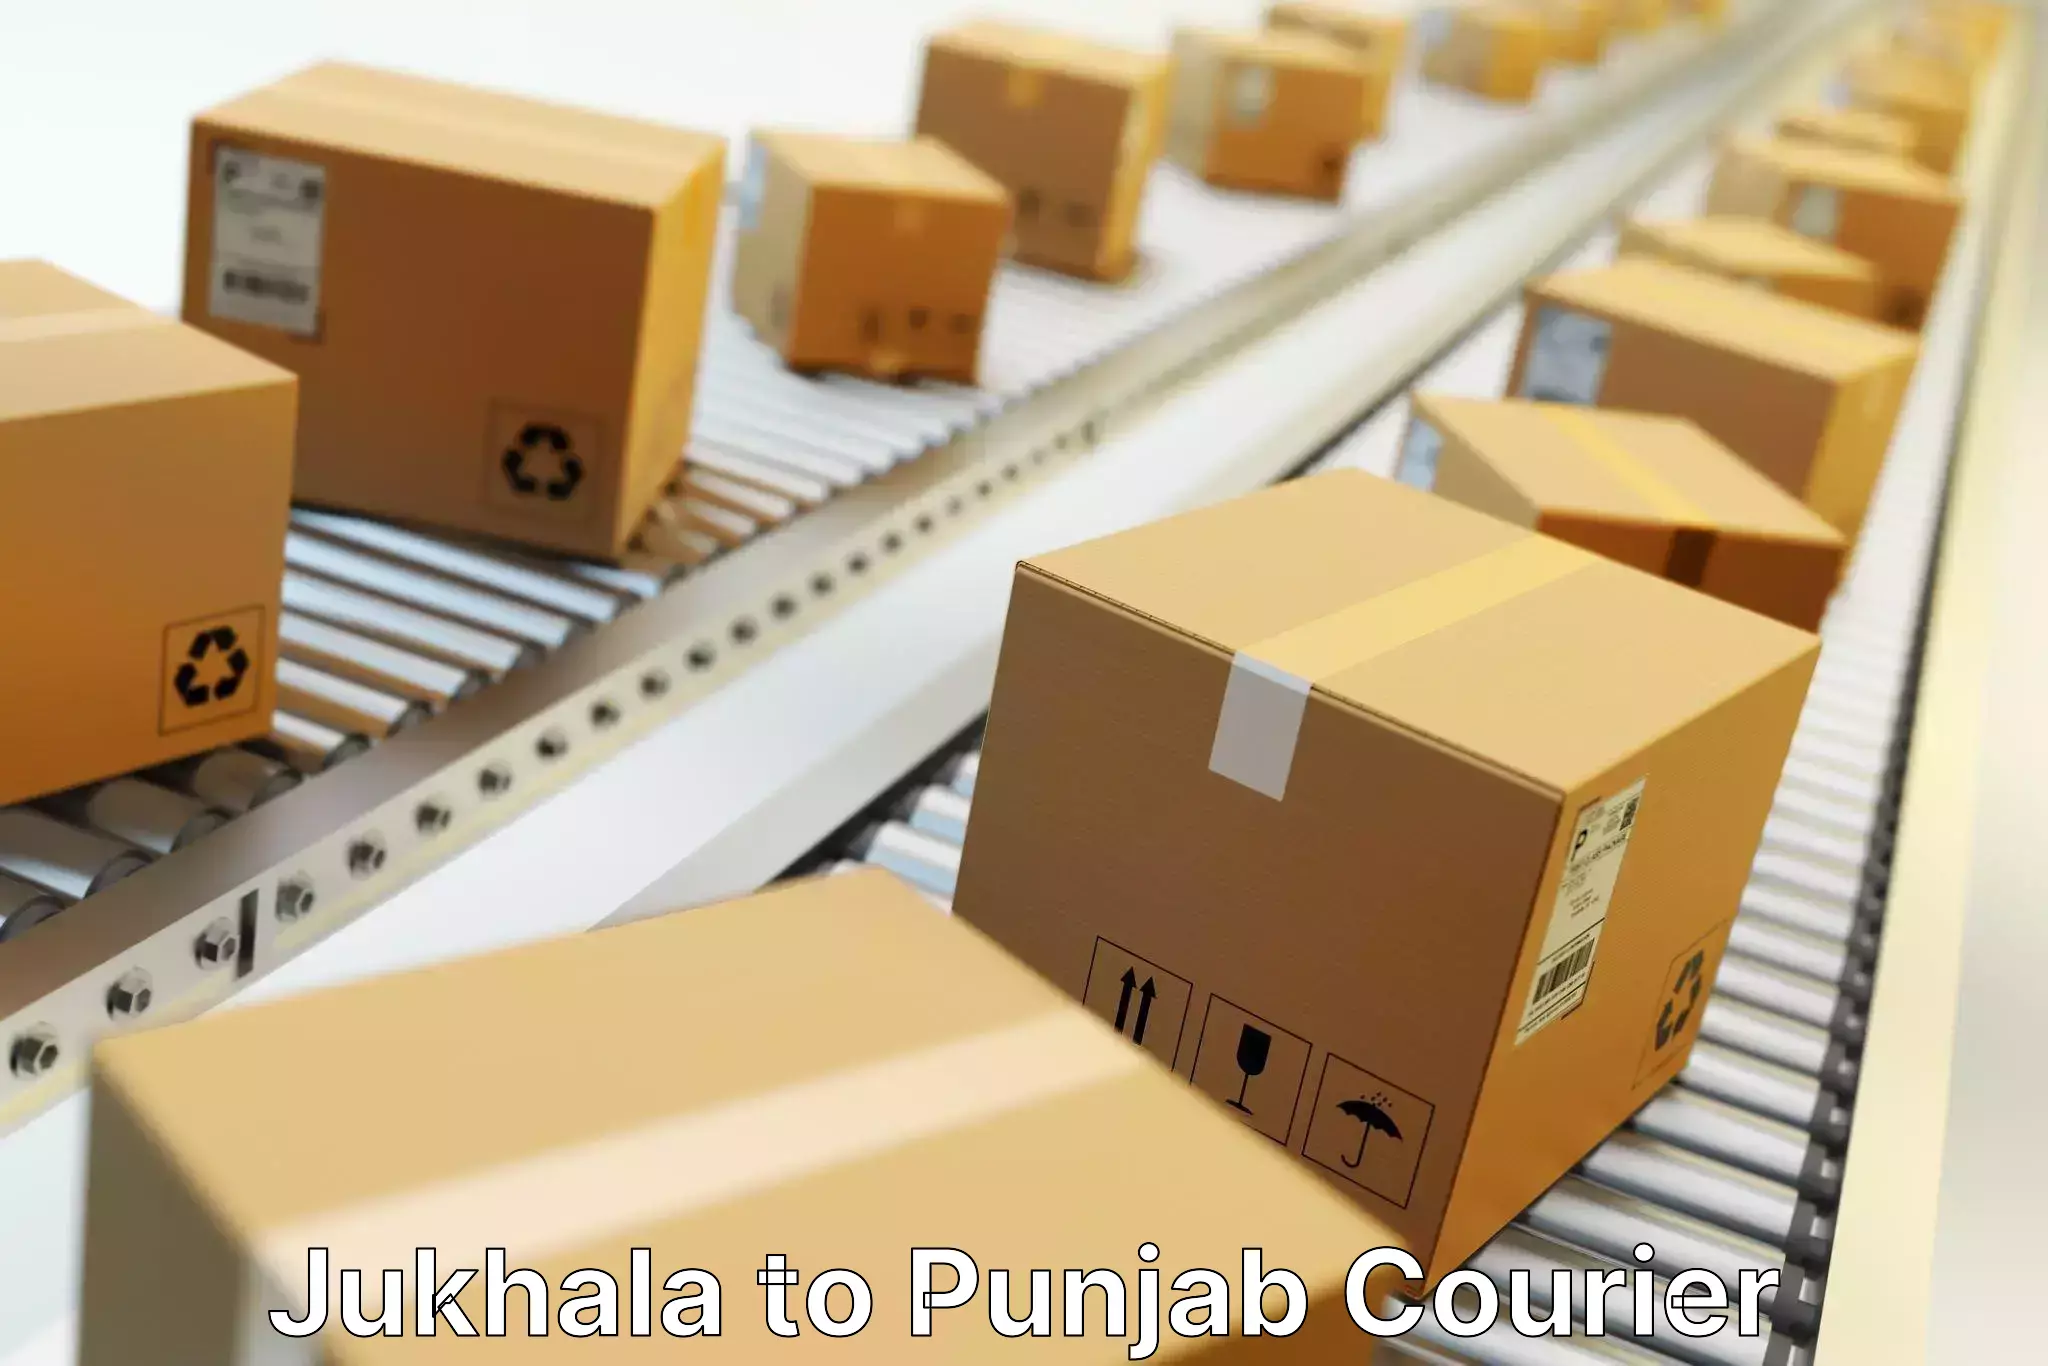 End-to-end delivery Jukhala to Patiala